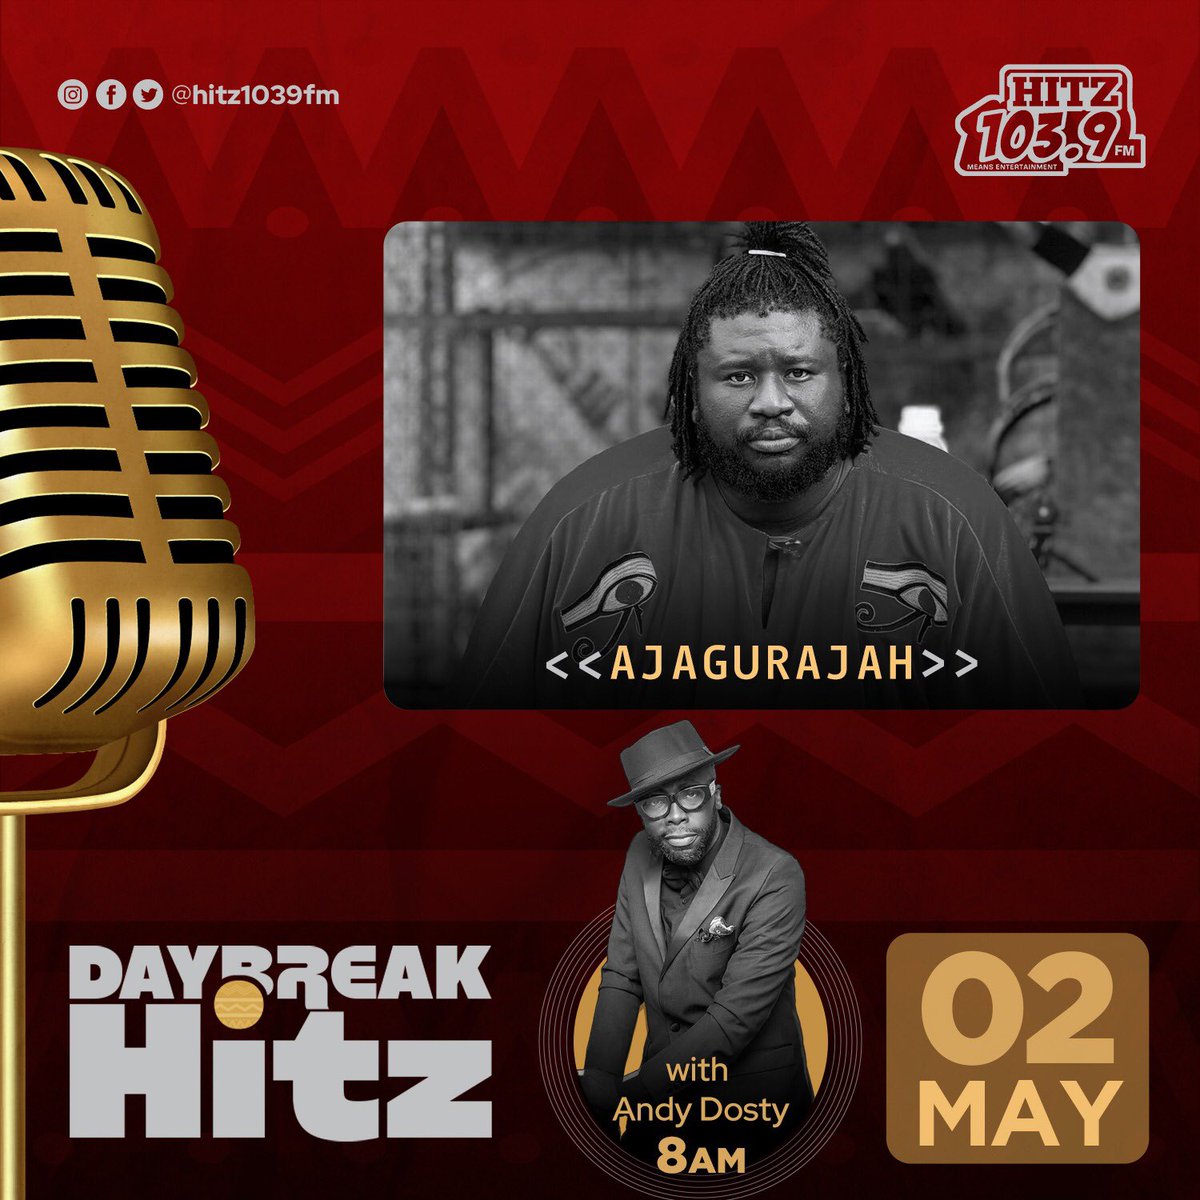 Bishop Kwabena Boakye Asiamah, popularly known as Ajagurajah, who is also @kwawkese’s best friend, is our special guest on #DaybreakHitz tomorrow morning. 

You can’t miss this for anything!